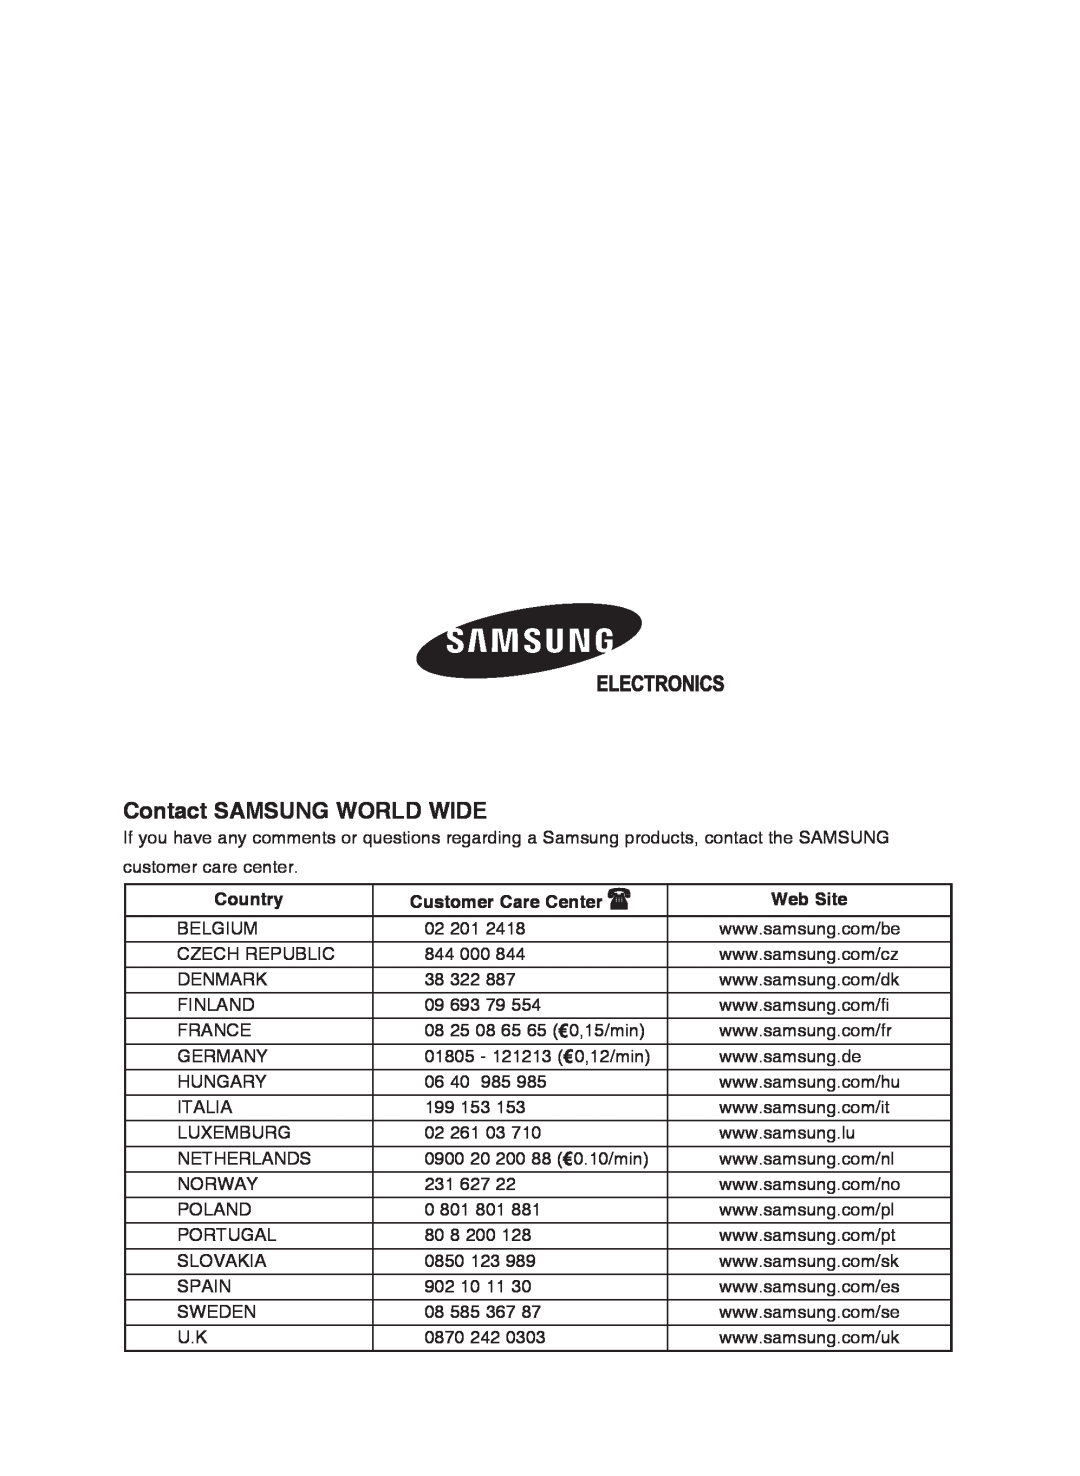 Samsung AS09J, AS09F, AS24J, AS24W, AS24F, AS18J, AS18W Contact SAMSUNG WORLD WIDE, Country, Customer Care Center, Web Site 